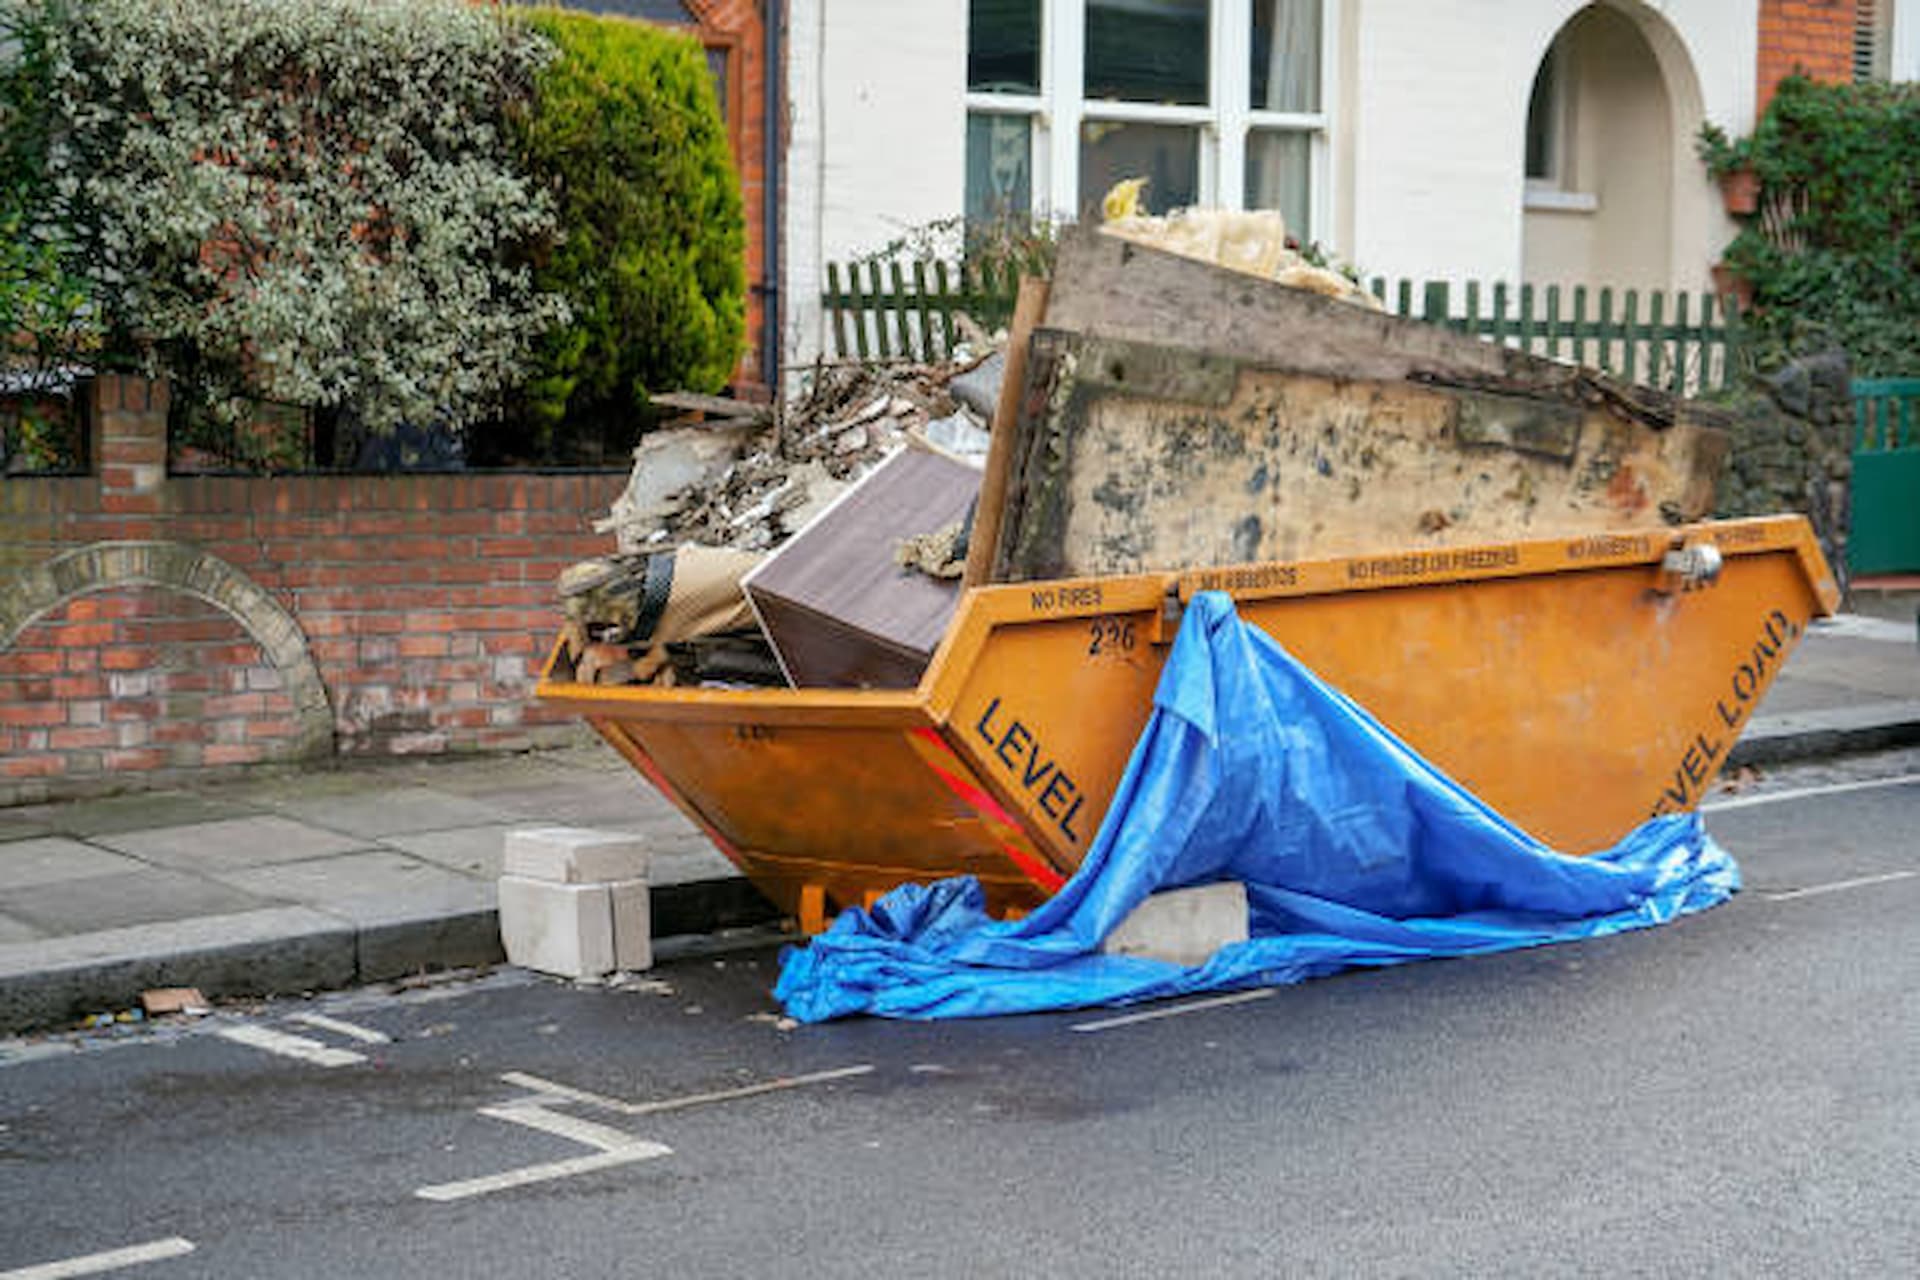 The Skip Hire Company You Can Trust To Get The Job Done